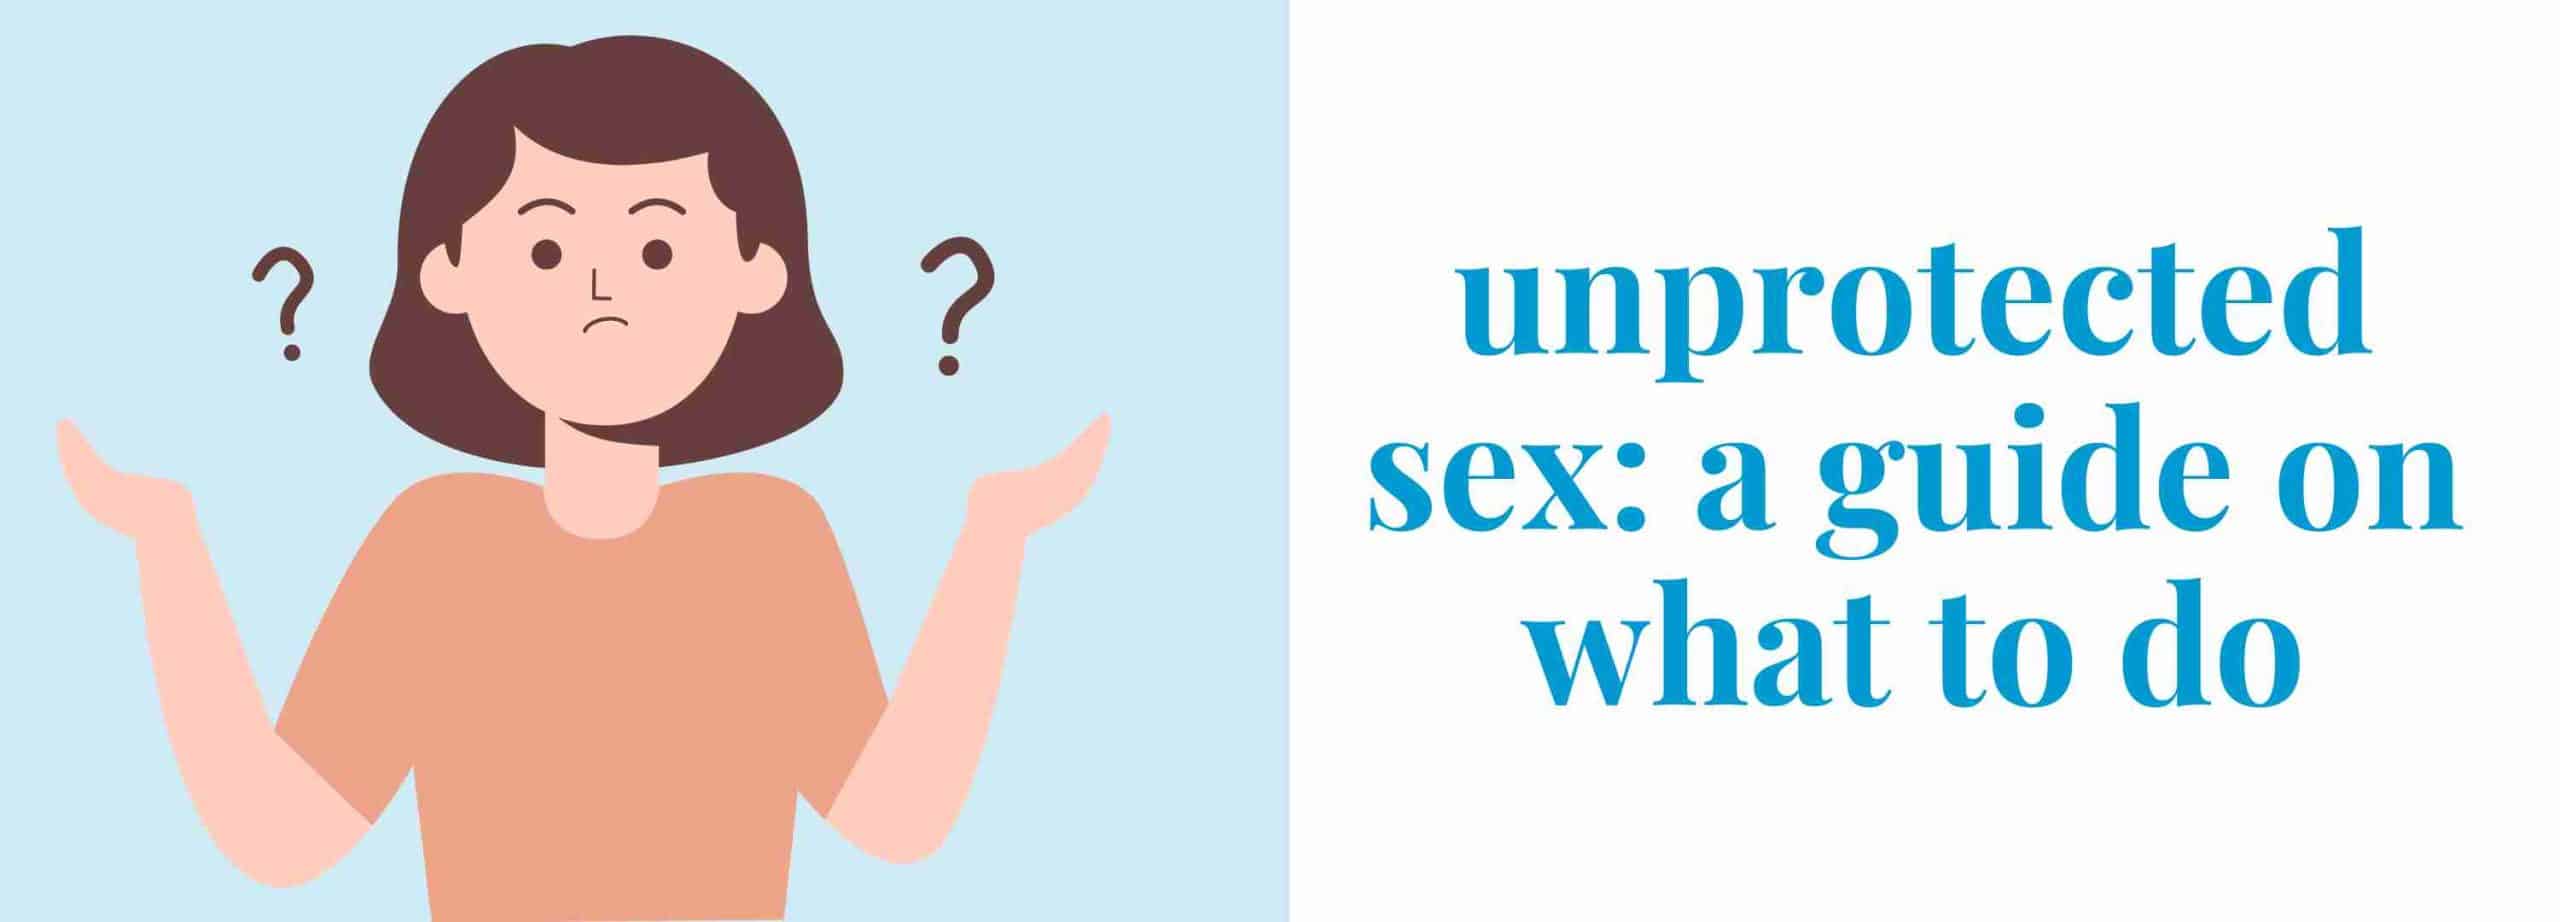 Unprotected Sex: A Guide on What to Do